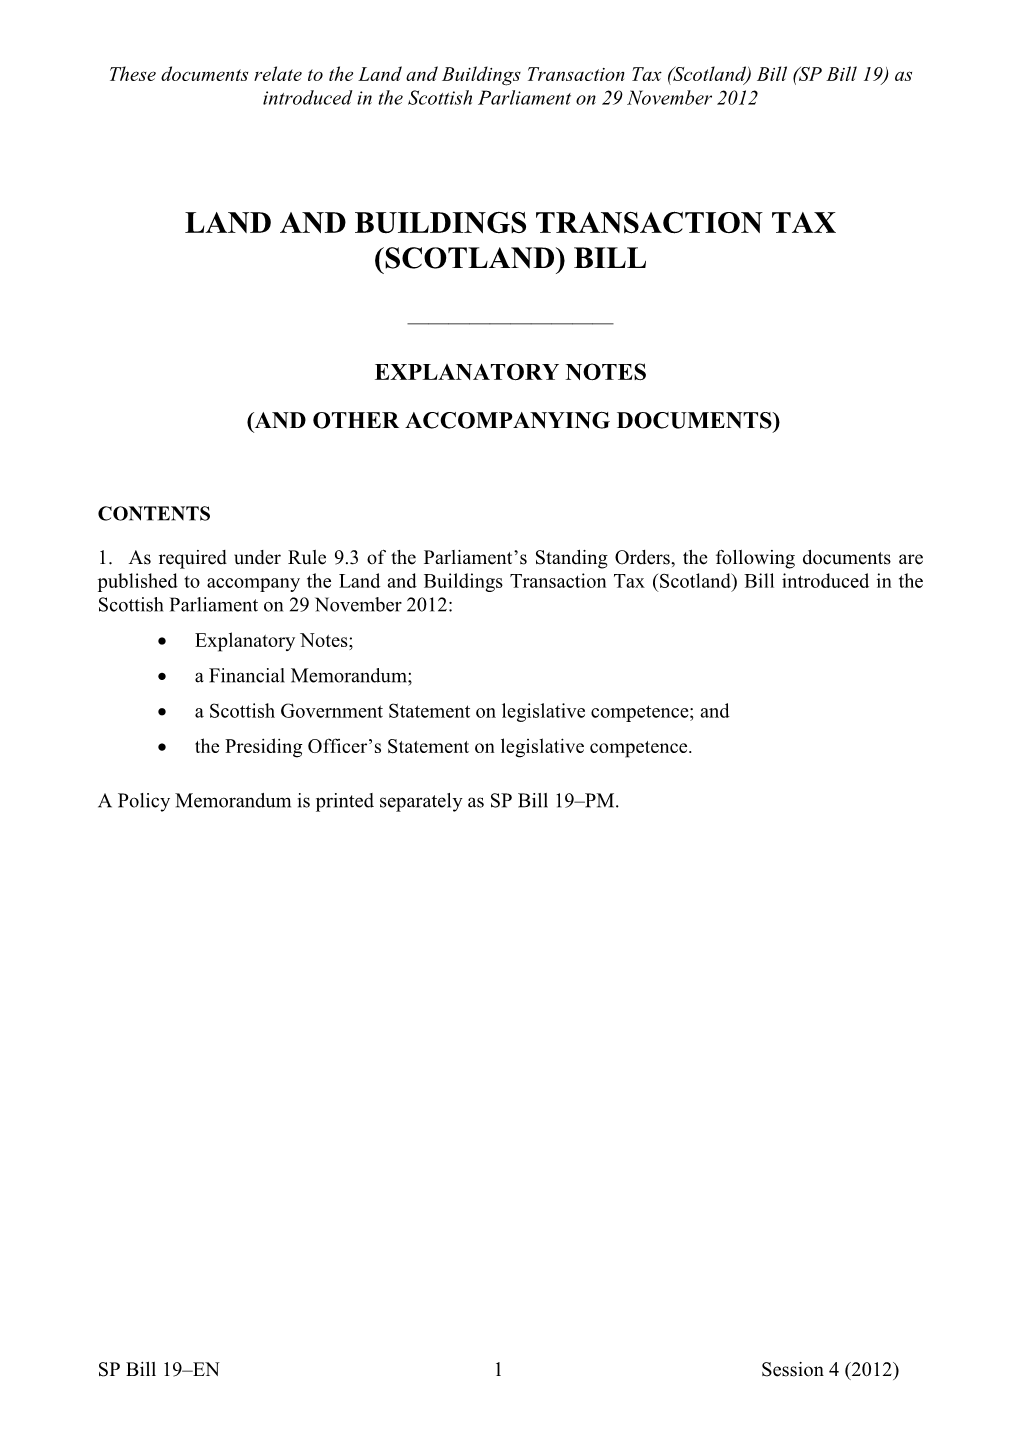 Land and Buildings Transaction Tax (Scotland) Bill (SP Bill 19) As Introduced in the Scottish Parliament on 29 November 2012